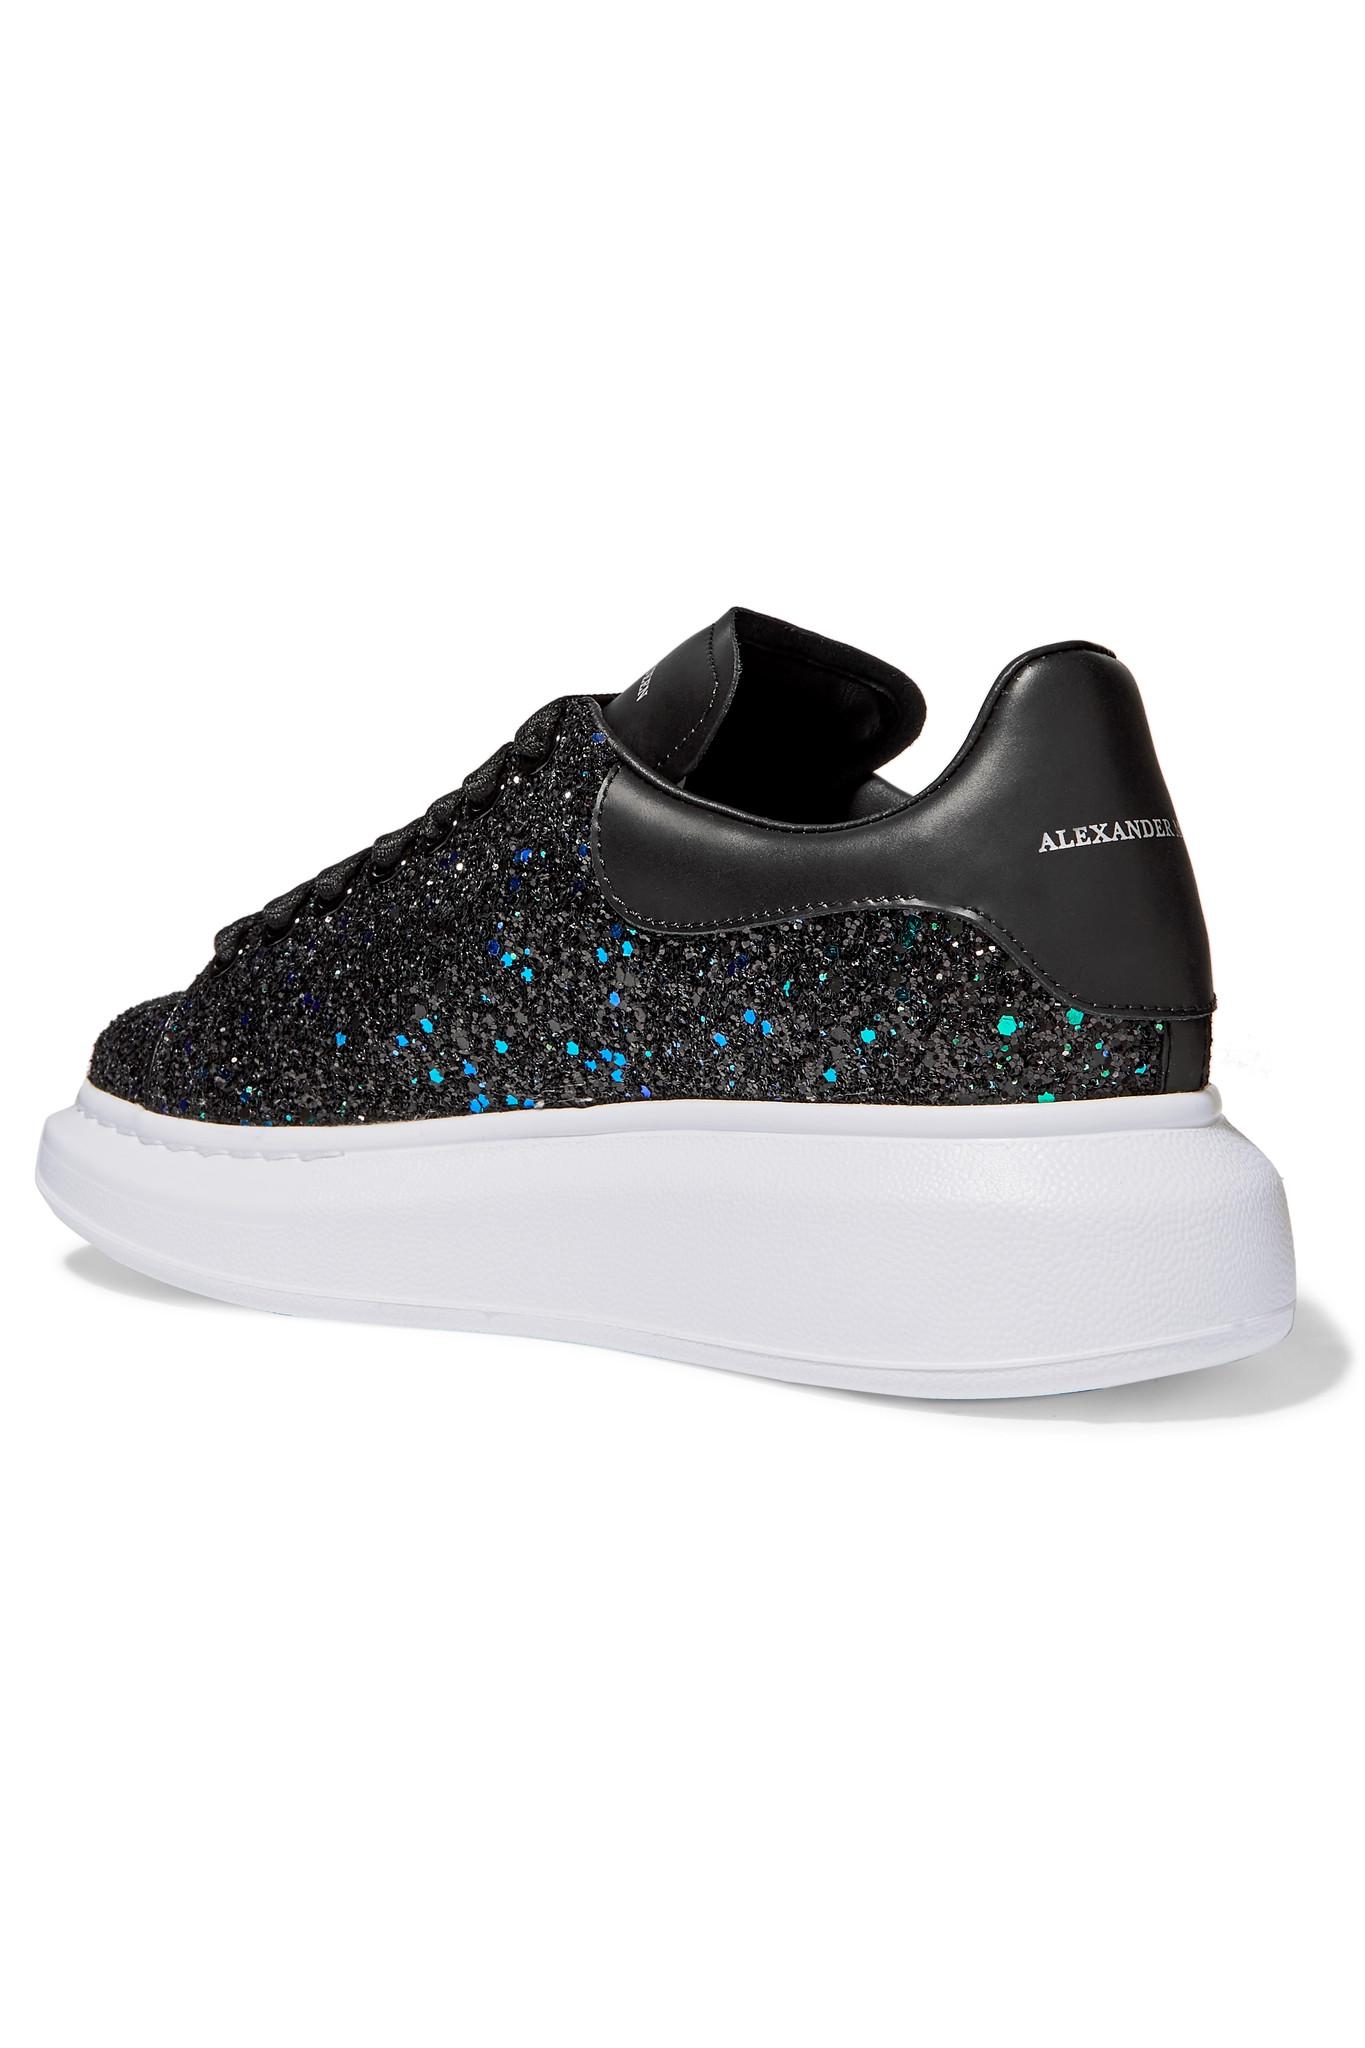 Alexander McQueen Leather Oversized Black Glitter Trainers - Save 50% | Lyst